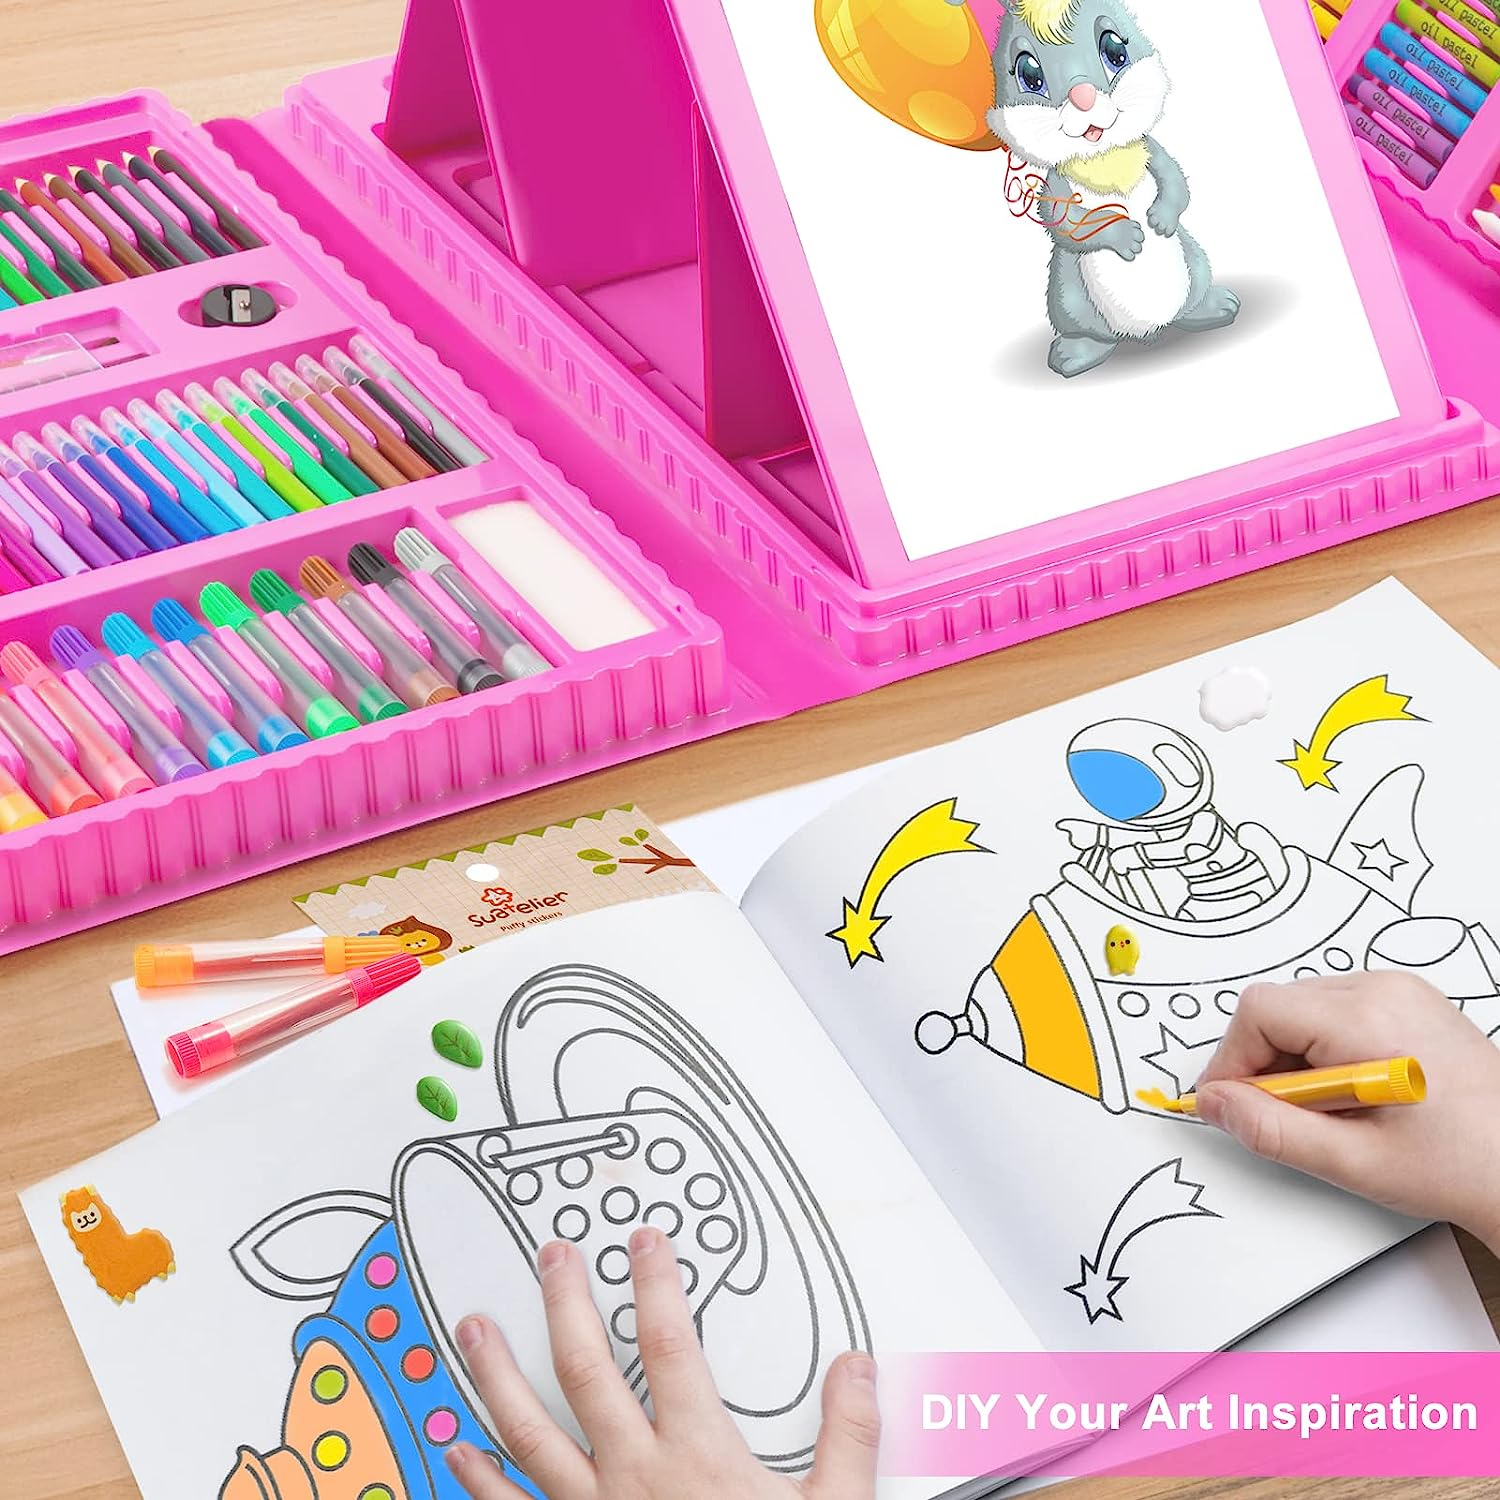 Drawing Supplies For Kids: Inspire Young Artists - Fundemonium